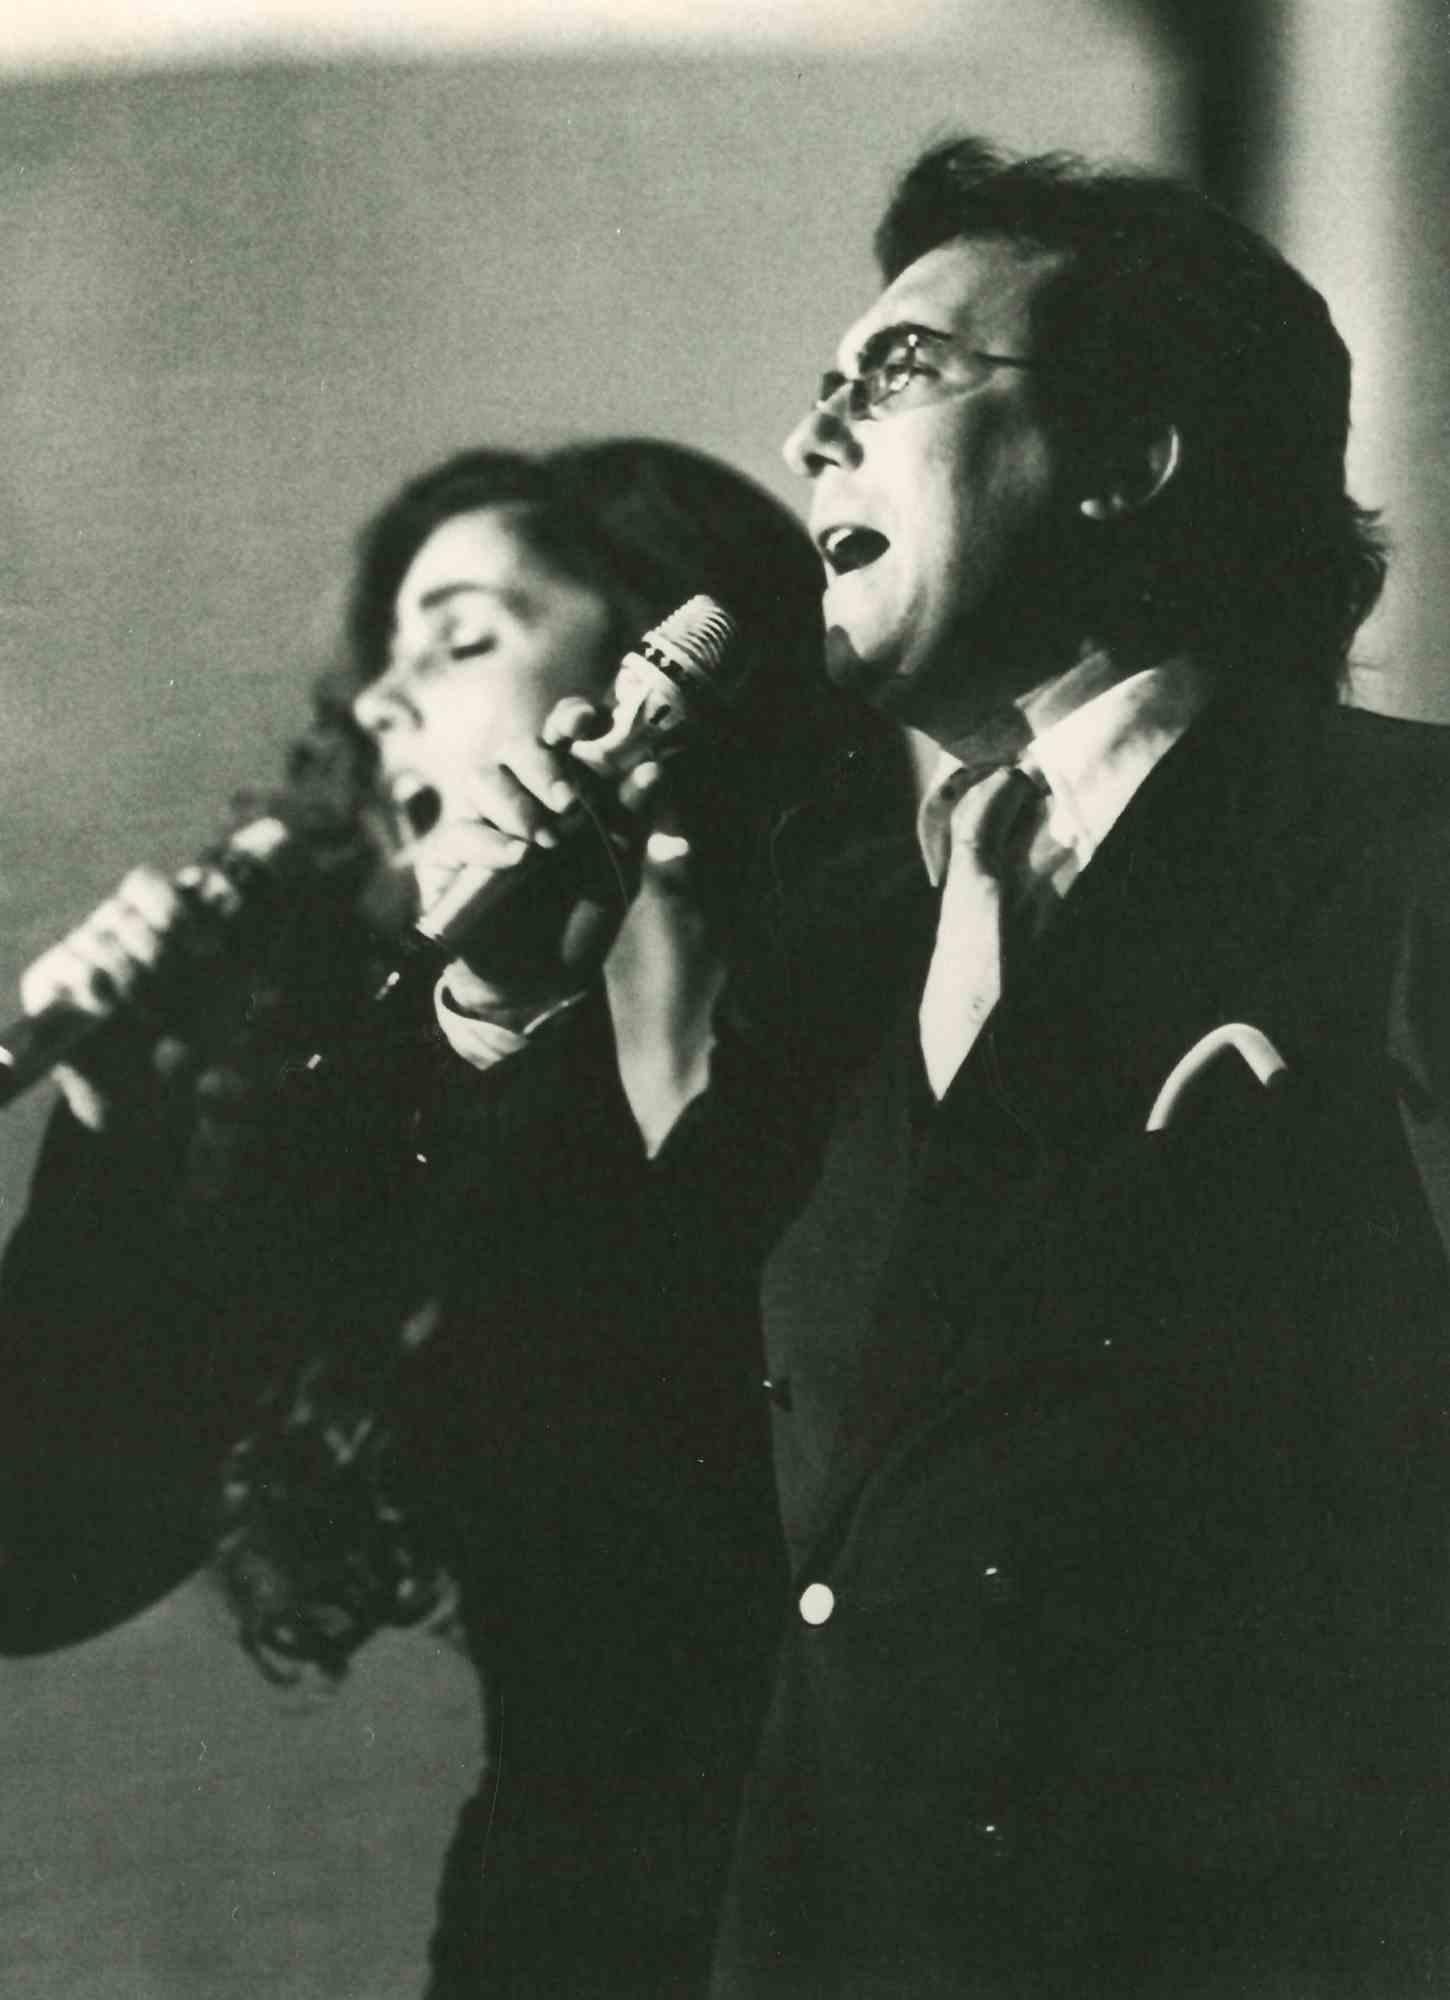 Unknown Portrait Photograph - Al Bano and Romina Power - Photograph - 1980s